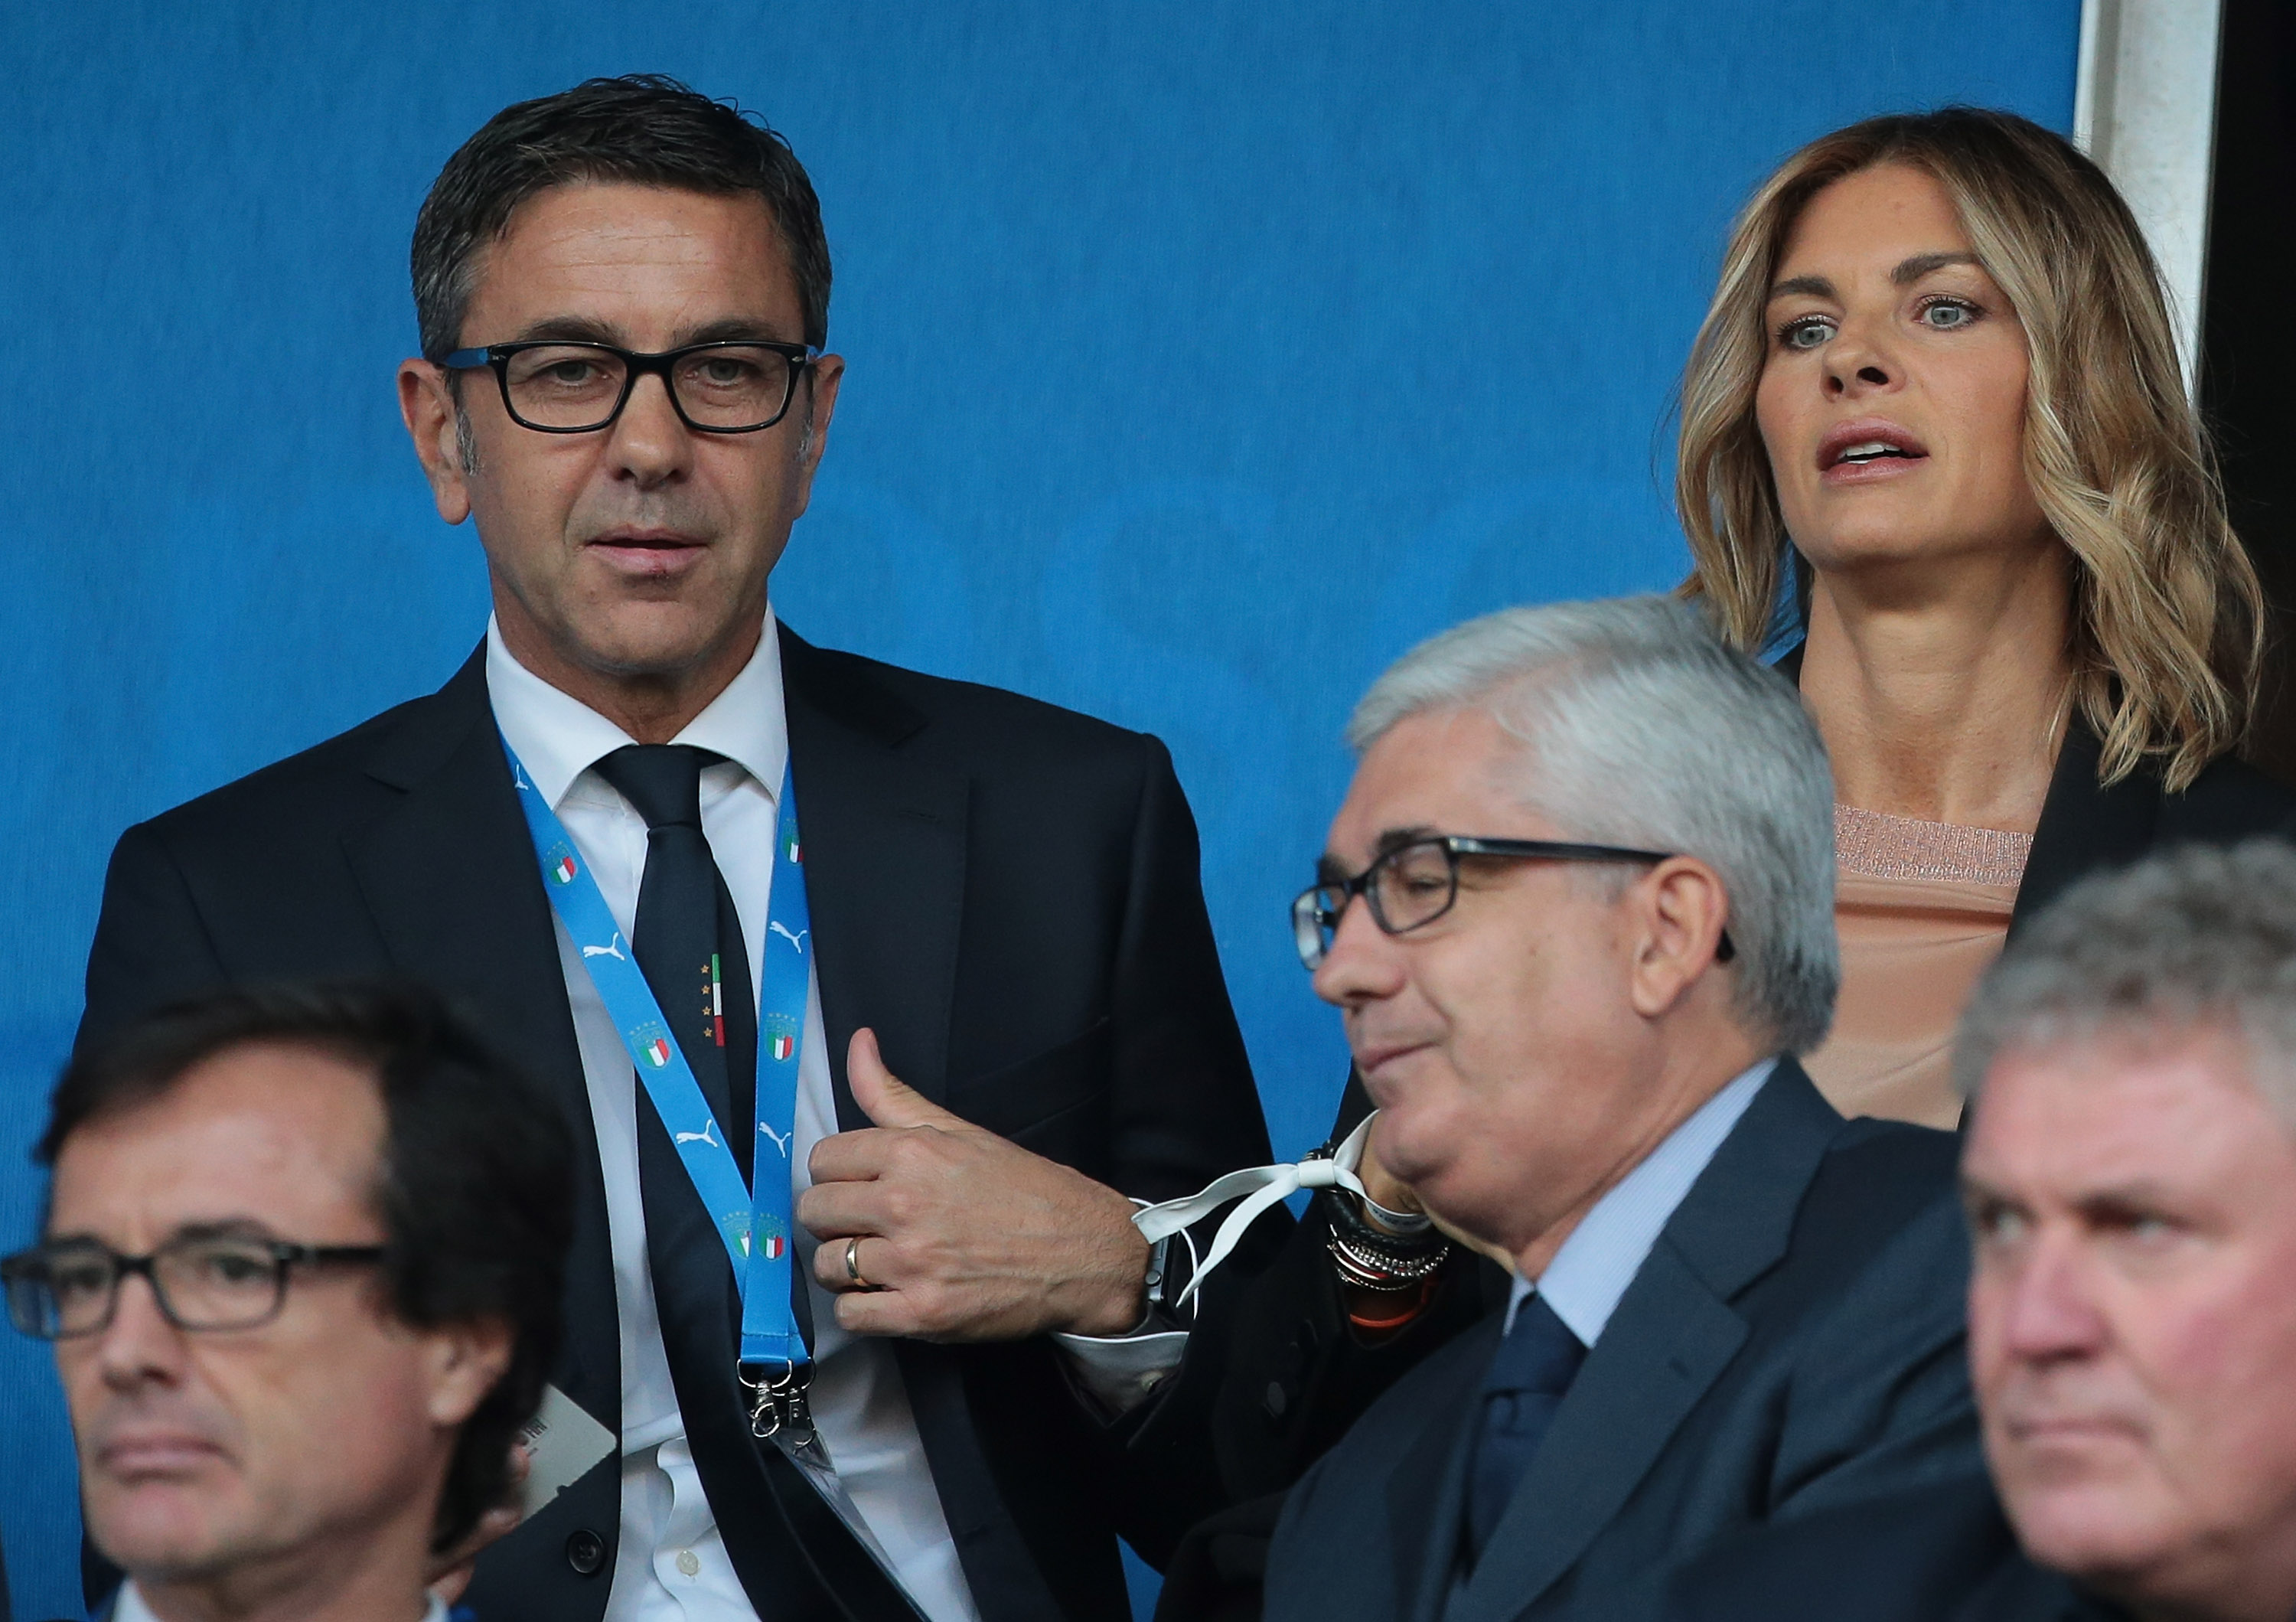 CREMONA, ITALY - OCTOBER 09:  Alessandro Costacurta (L) Commissioner of FIGC and his wife Martina Colombari are seen during the International Friendly match between Italy Women and Sweden Women at Stadio Giovanni Zini on October 9, 2018 in Cremona, Italy.  (Photo by Emilio Andreoli/Getty Images)